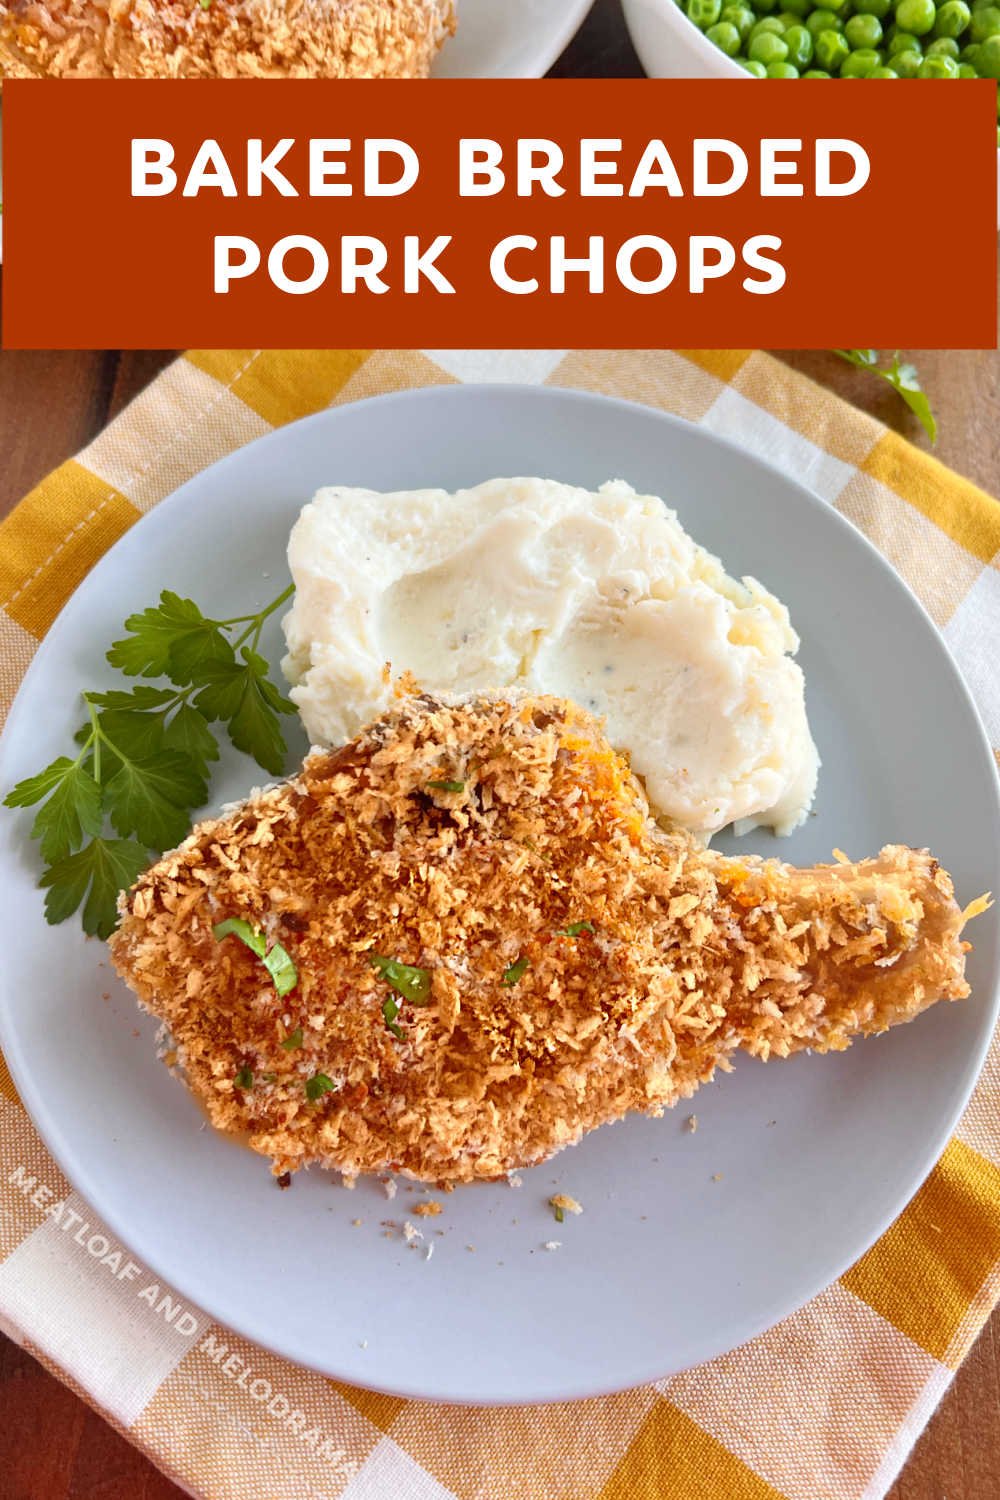 This Baked Breaded Pork Chops recipe uses seasoned panko bread crumbs for crispy oven fried pork chops in less than 30 minutes! These bone in pork chops are an easy dinner recipe the whole family will love! via @meamel